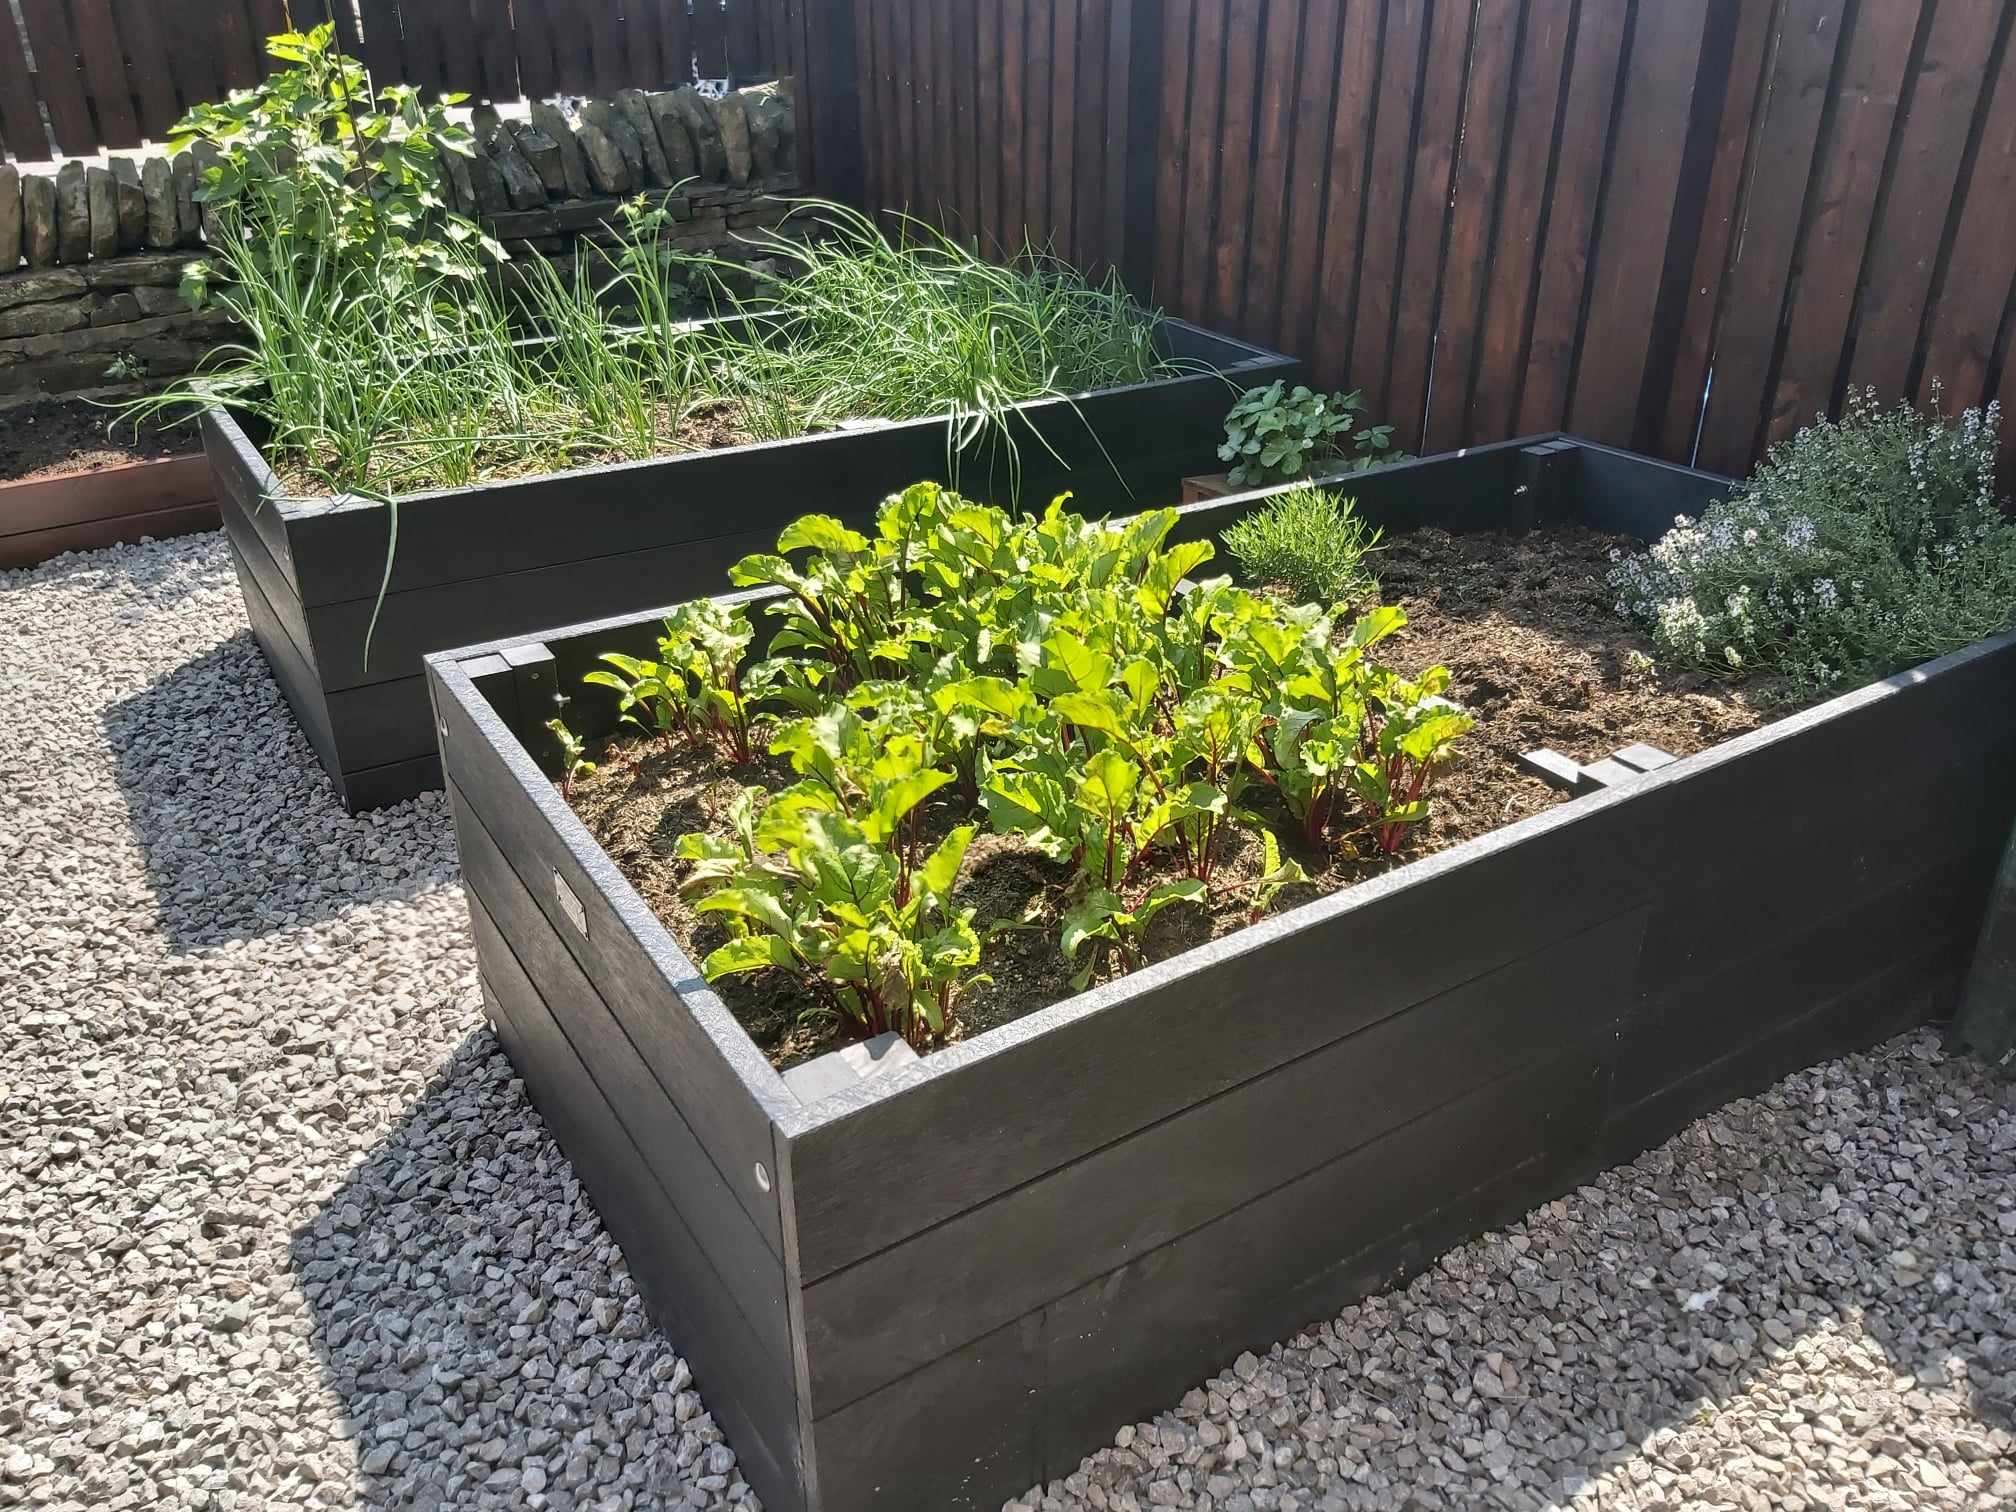 British Recycled Plastic raised bed kits with fresh vegetables